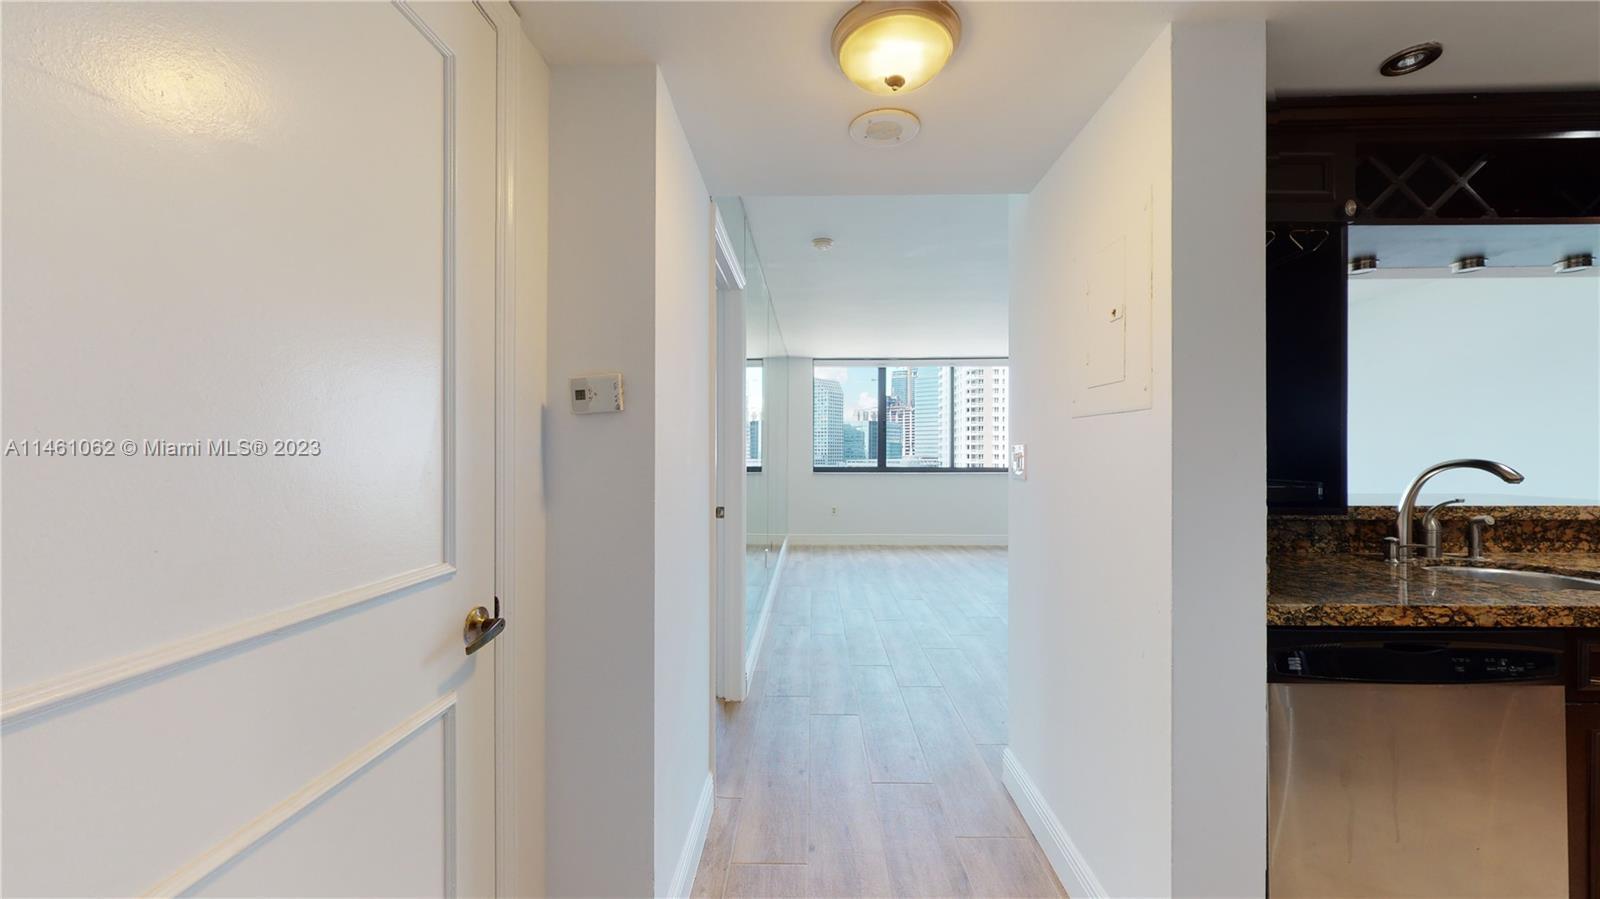 Renovated 2BR/2BA condo featuring a desirable split floor plan. It's move-in ready with upgrades thr